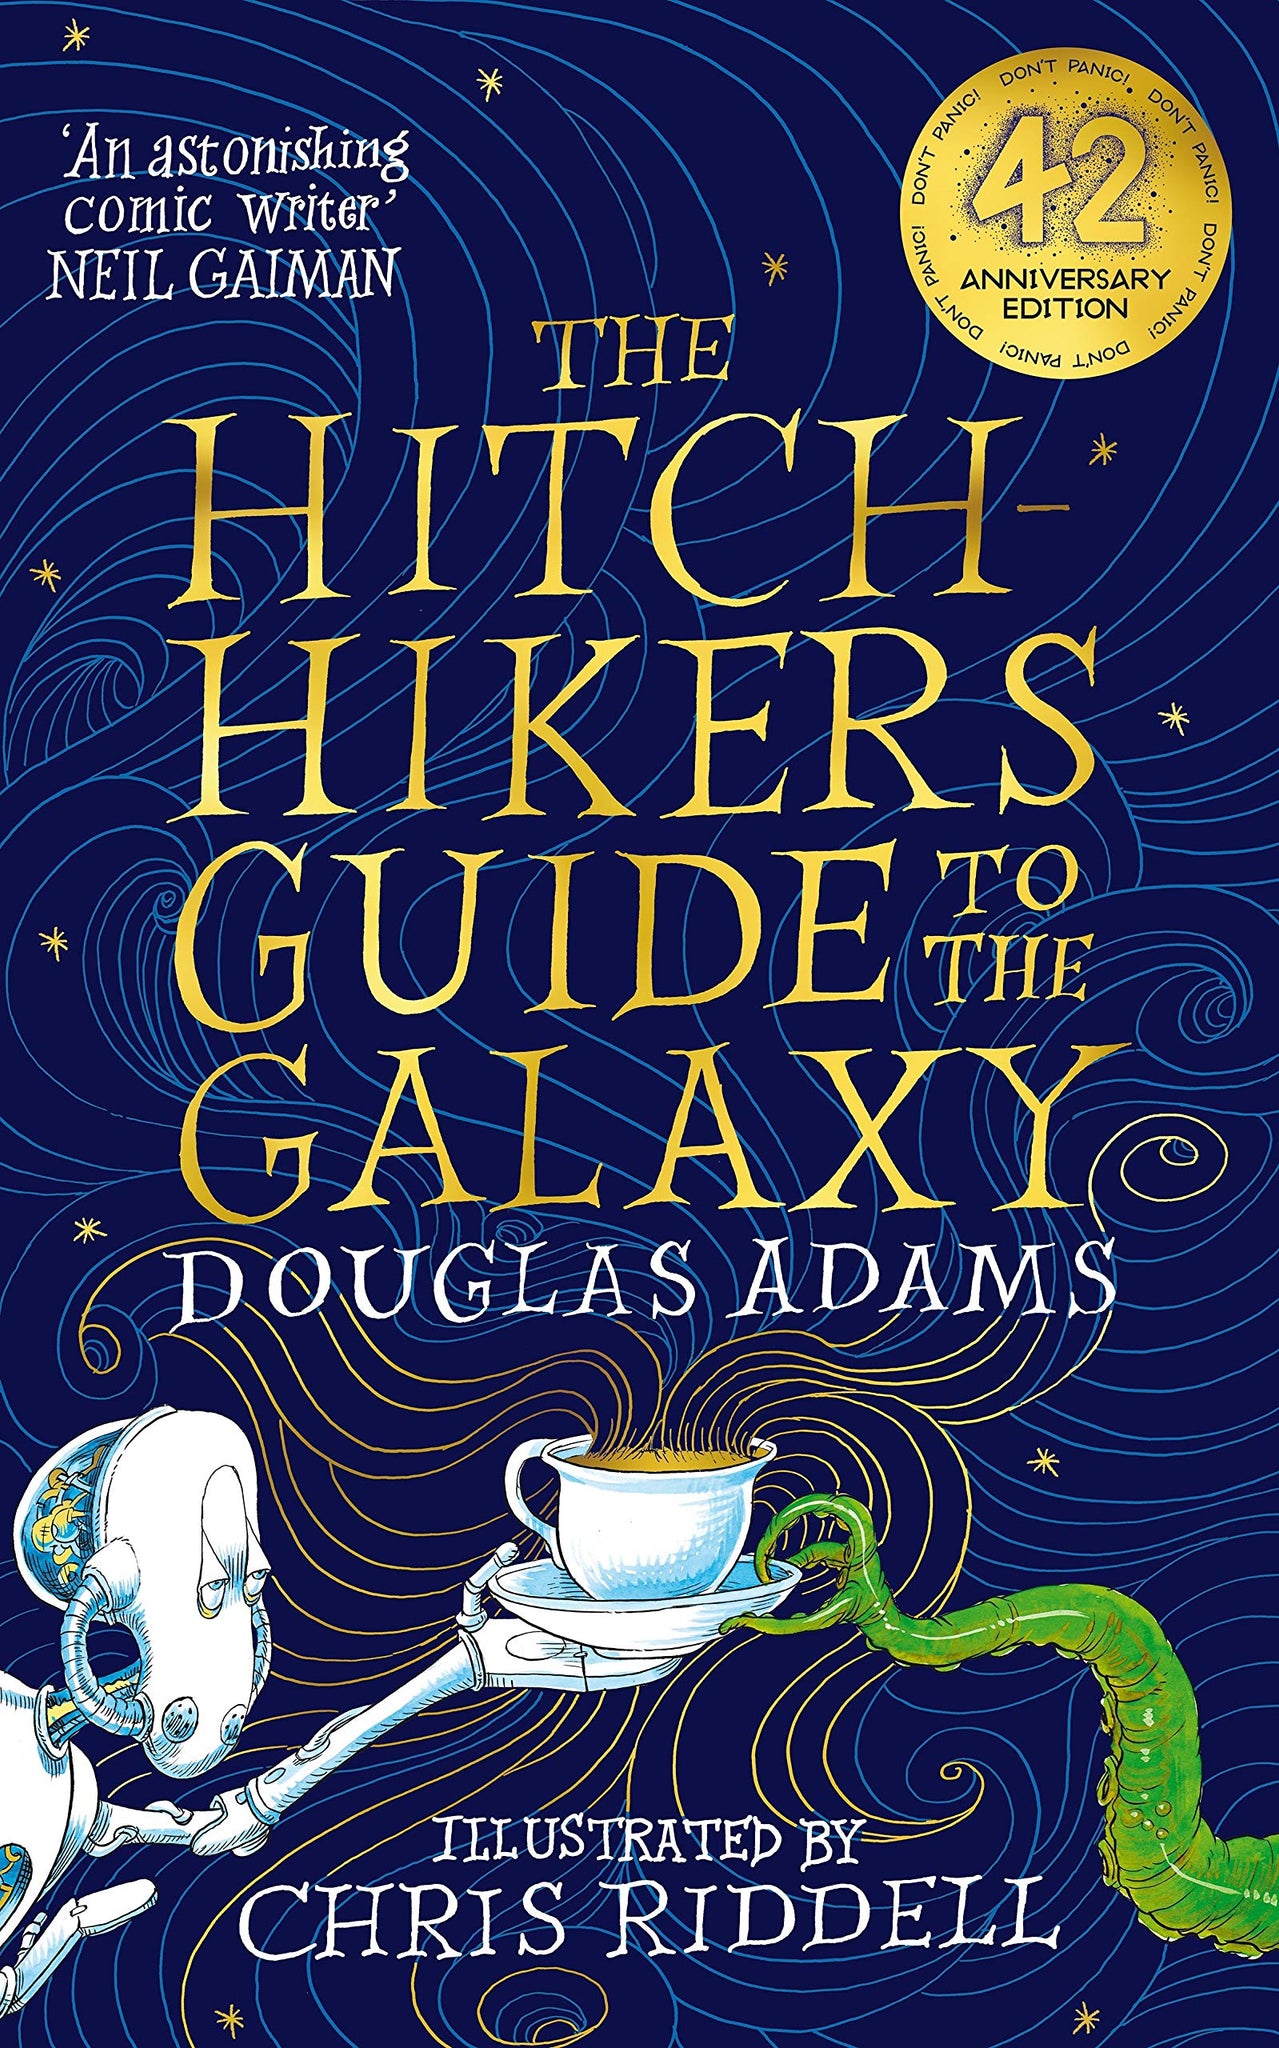 The Hitchhiker's Guide to the Galaxy Illustrated Edition - Paperback